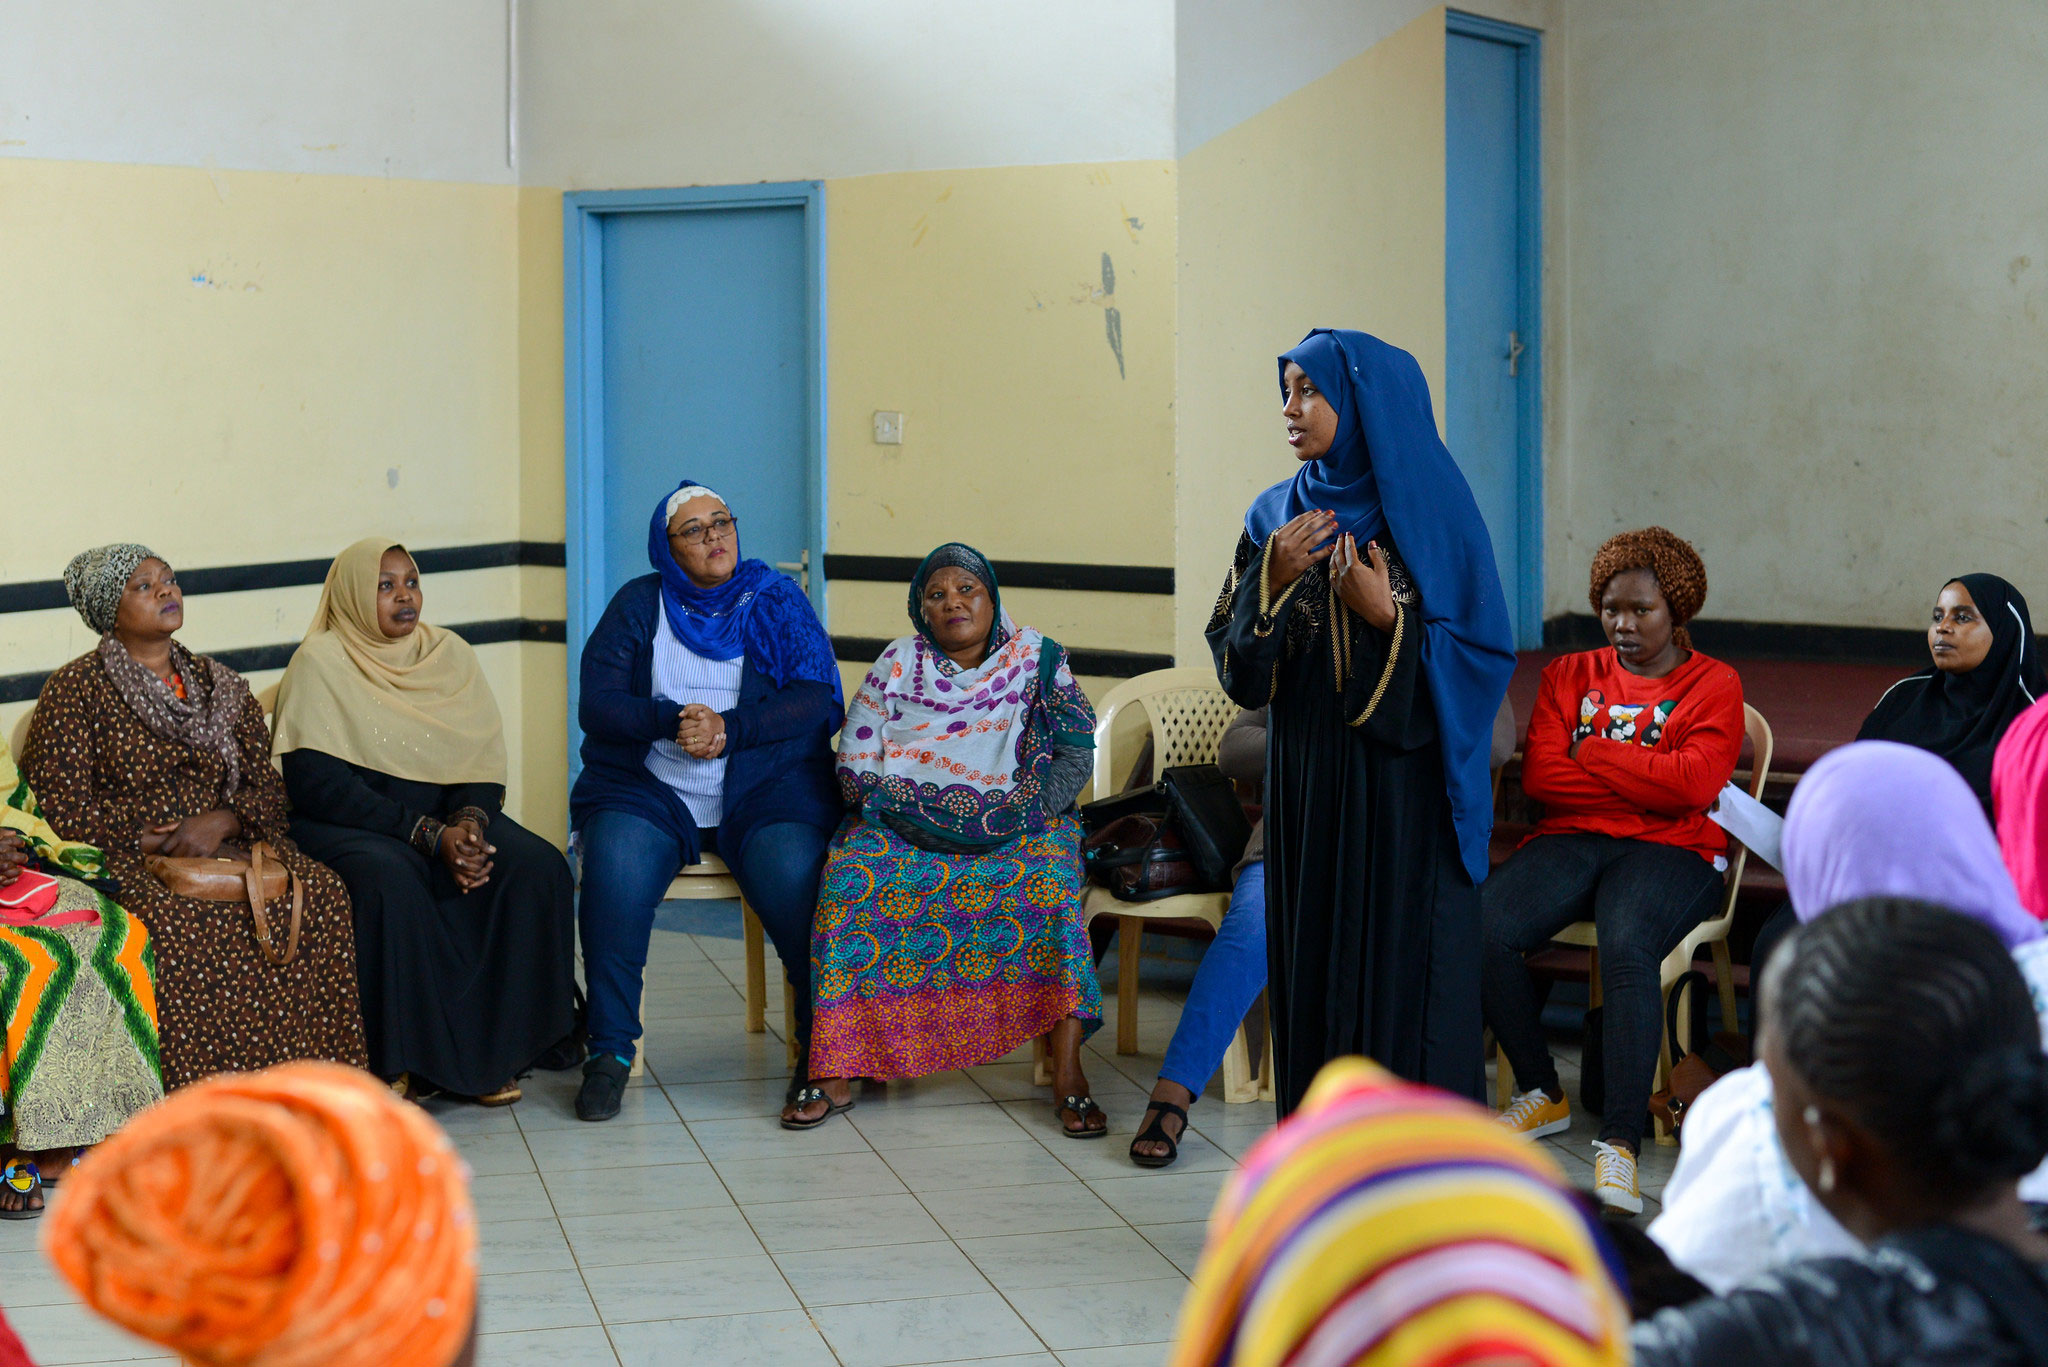 A dialogue on preventing extremism in the Eastleigh community of Nairobi, Kenya, organized by the Sisters Without Borders (SWB) network. 